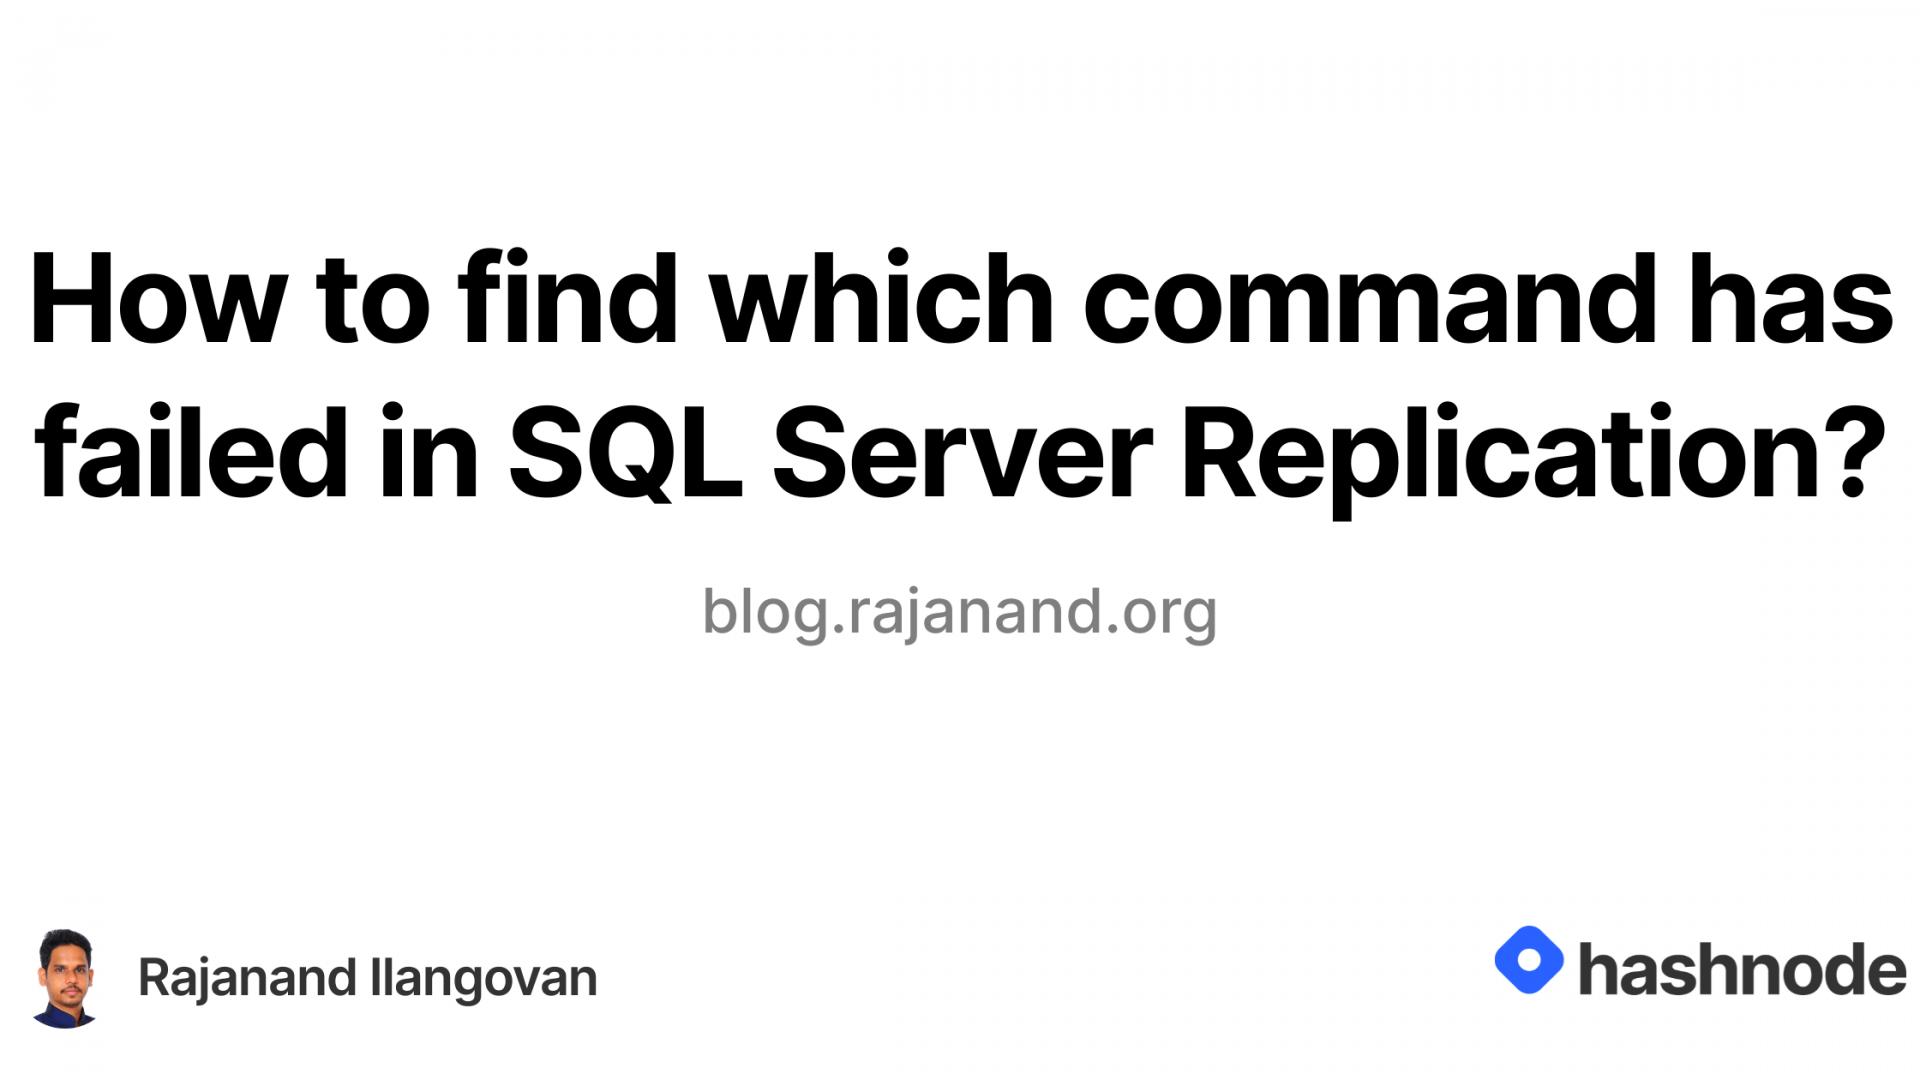 How to find which command has failed in SQL Server Replication?